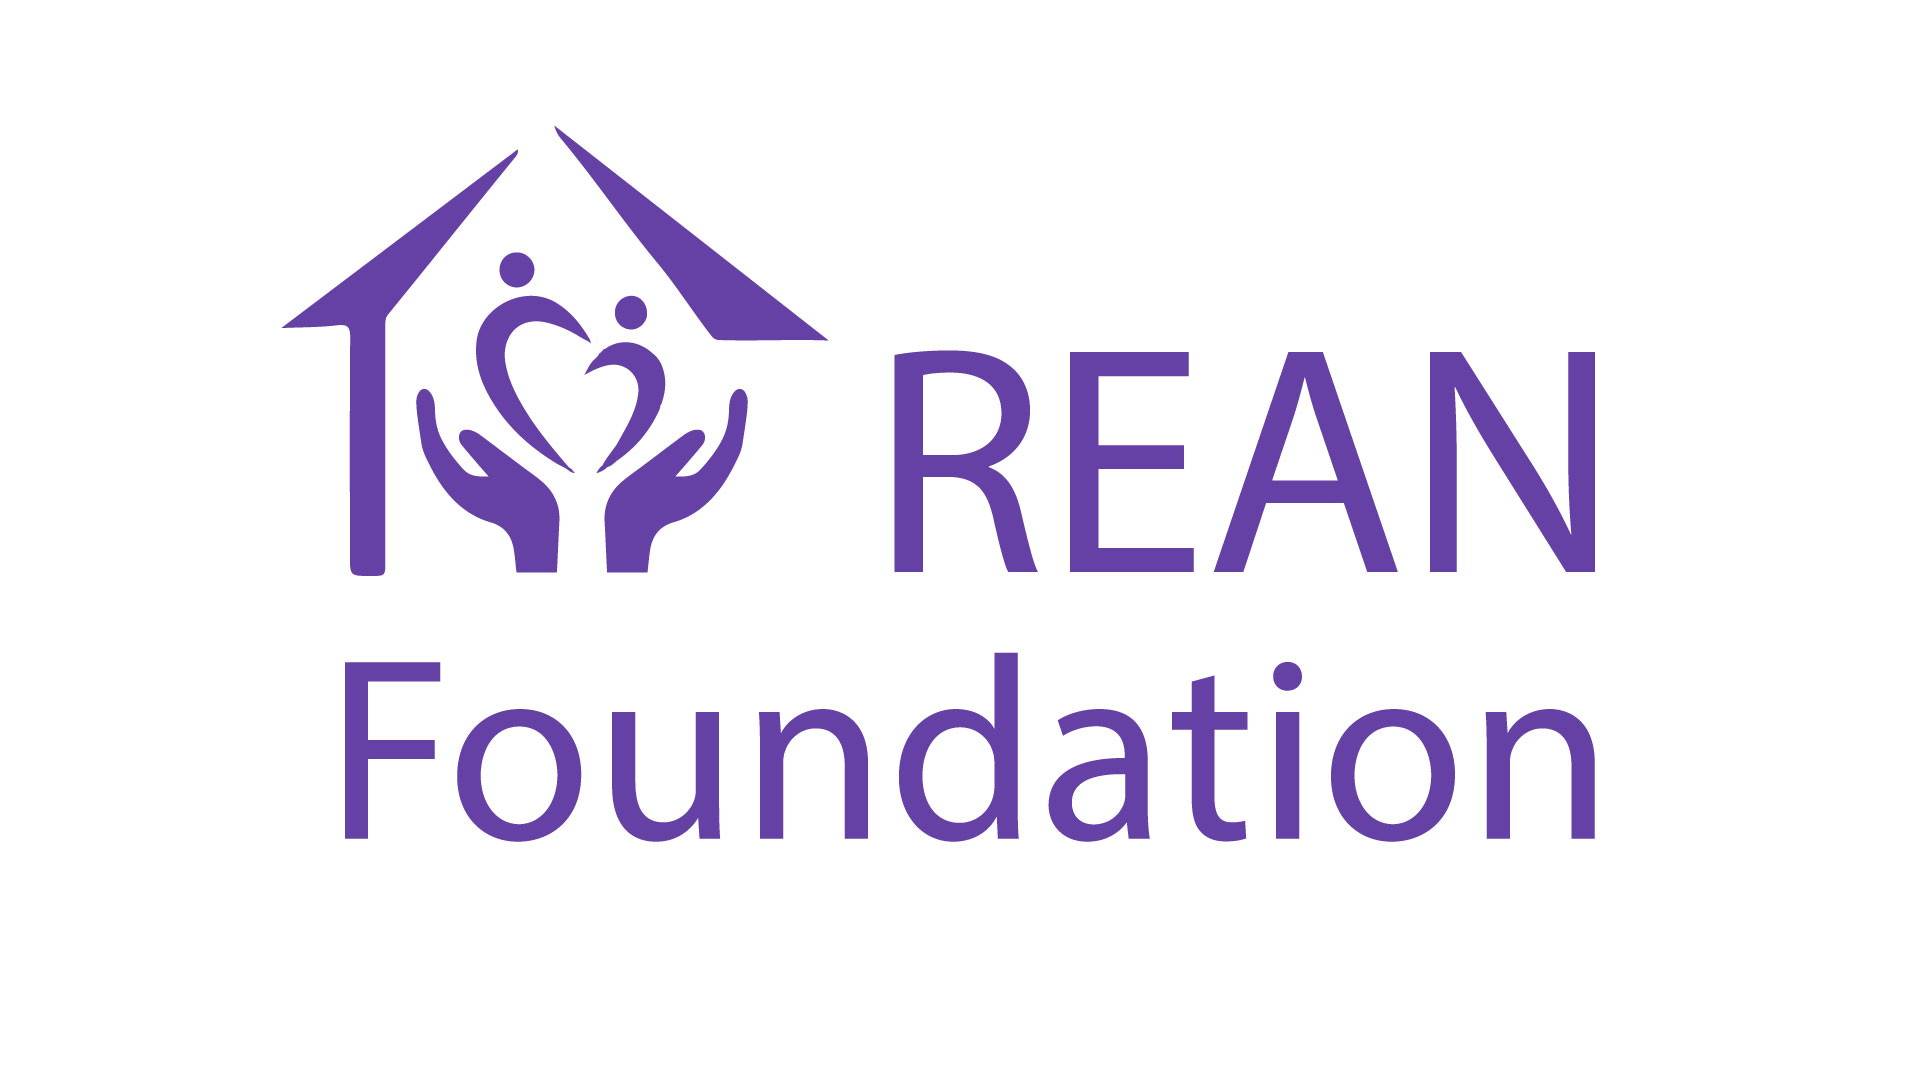 REAN Foundation, Wednesday, September 15, 2021, Press release picture